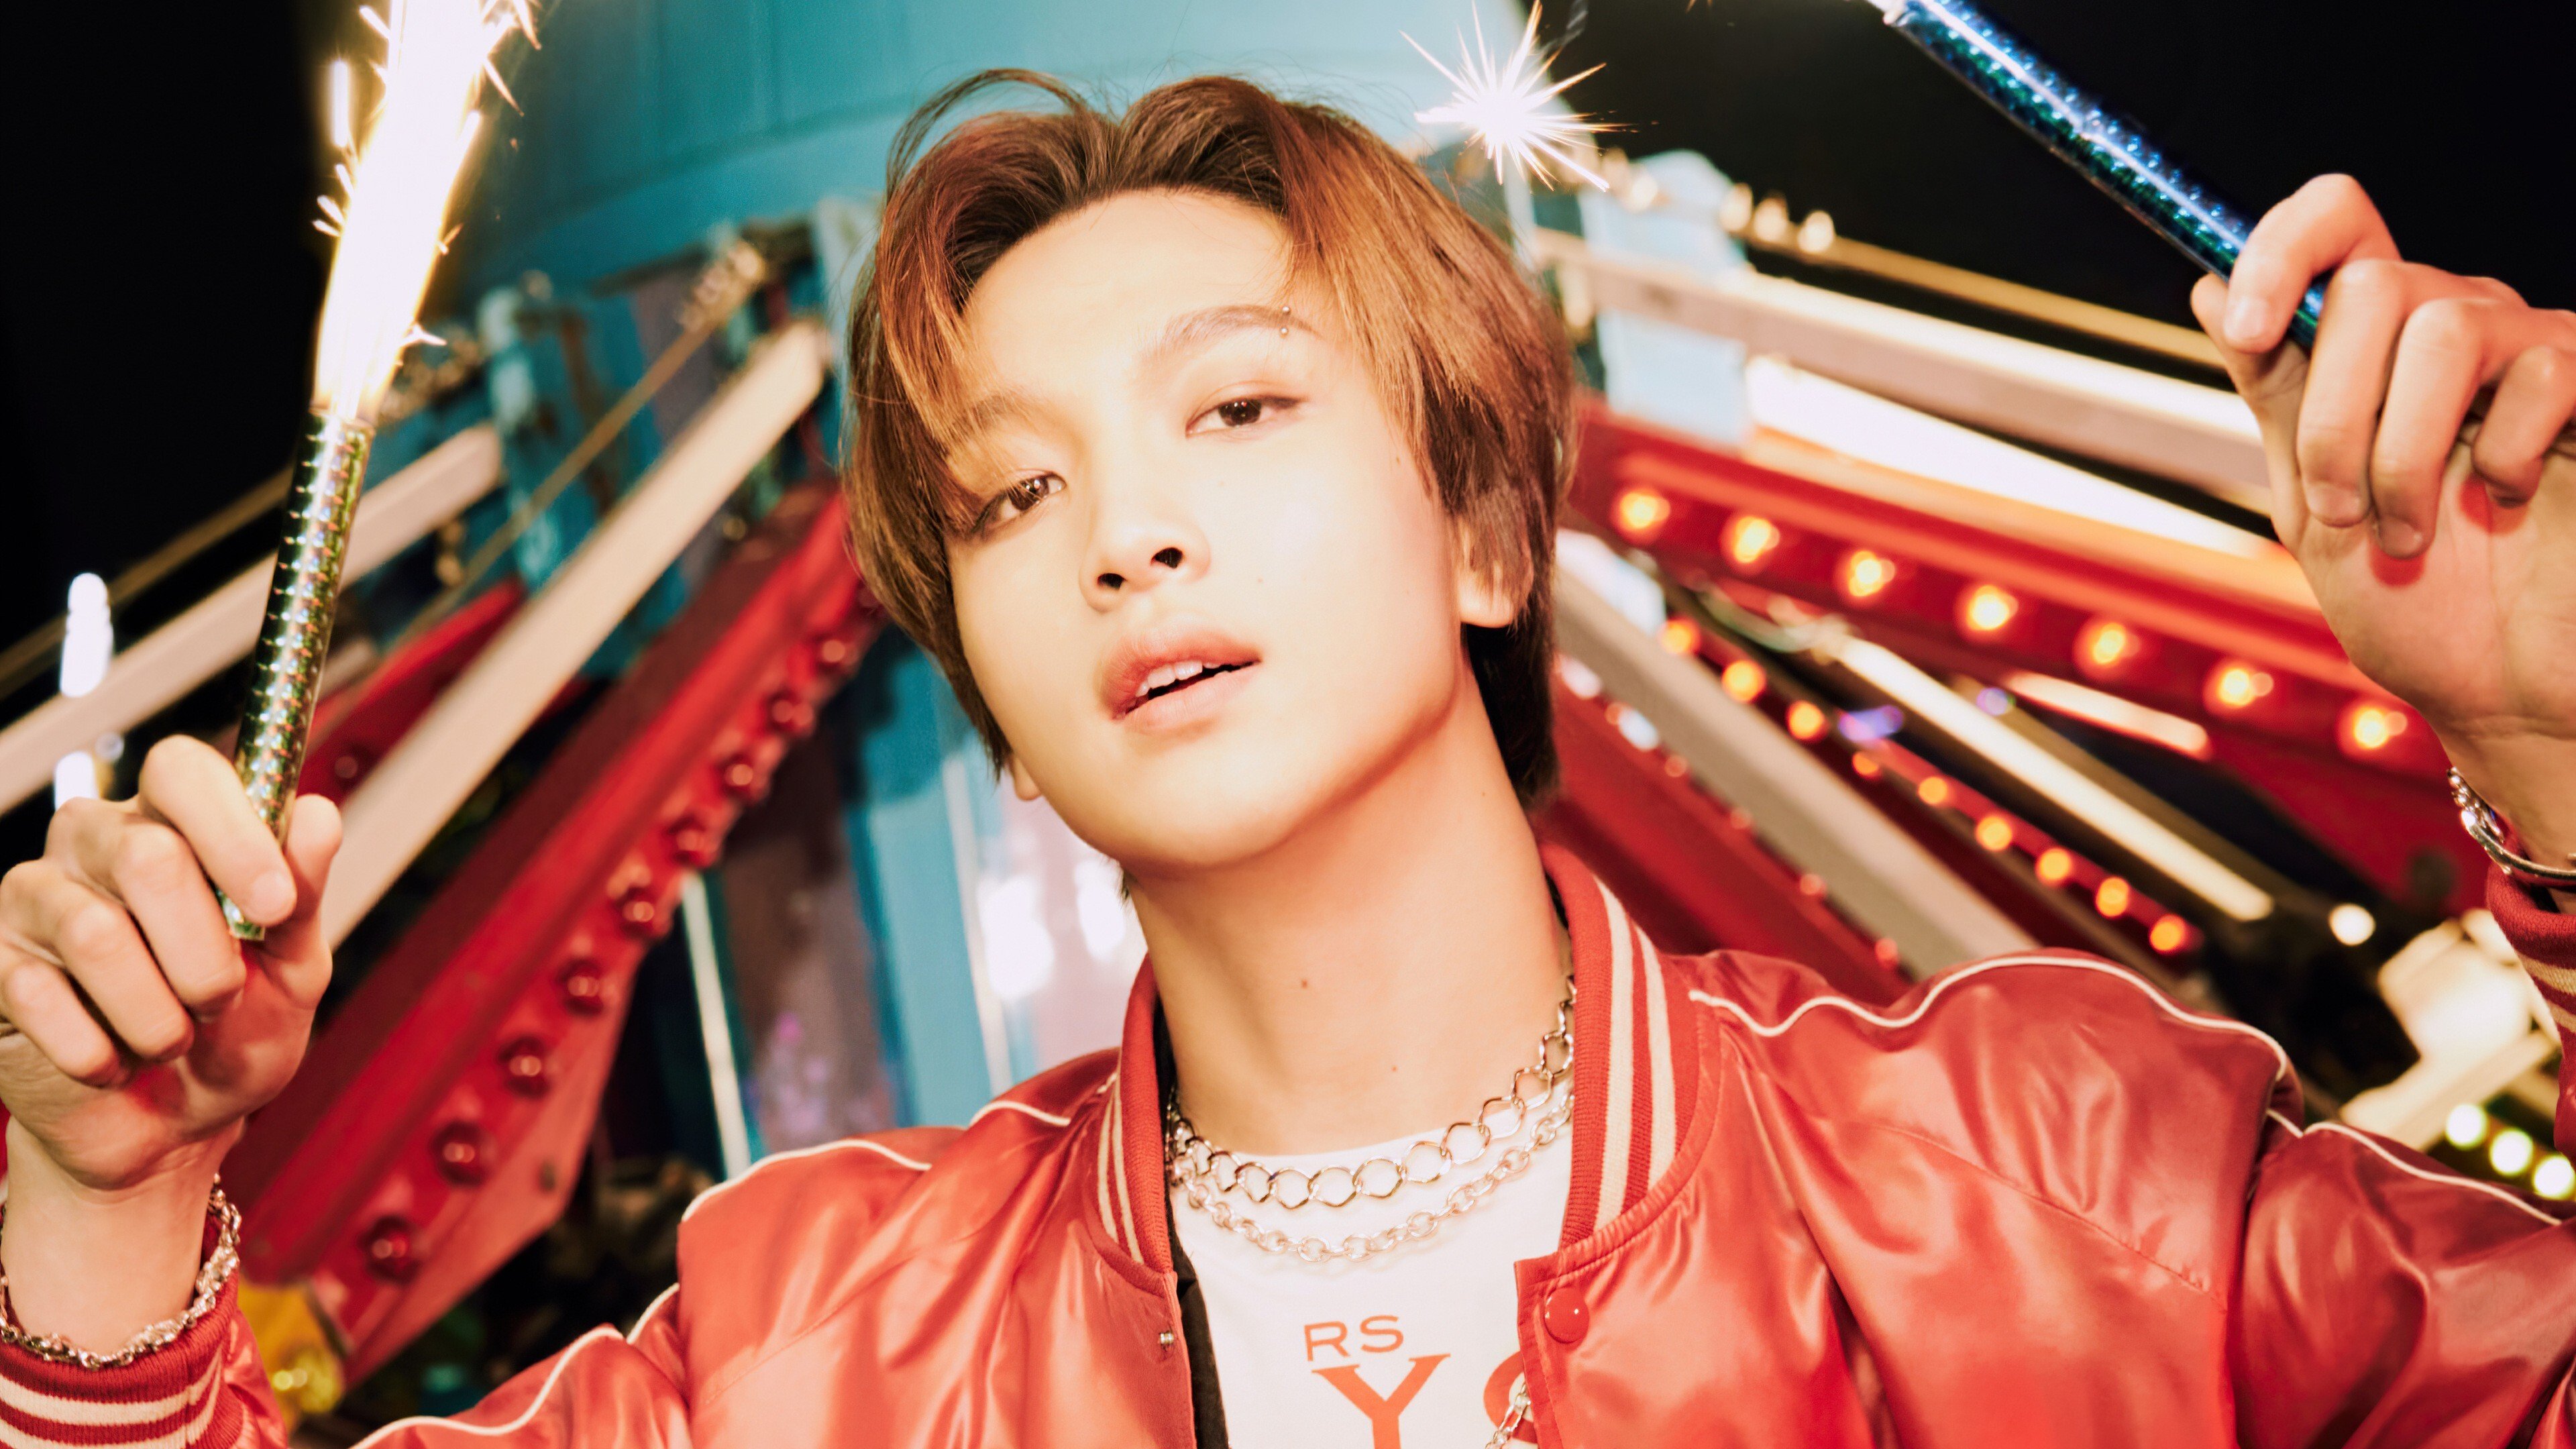 Haechan of NCT and NCT 127 is a talented and confident performer, and K-pop fans love him for his outgoing personality.